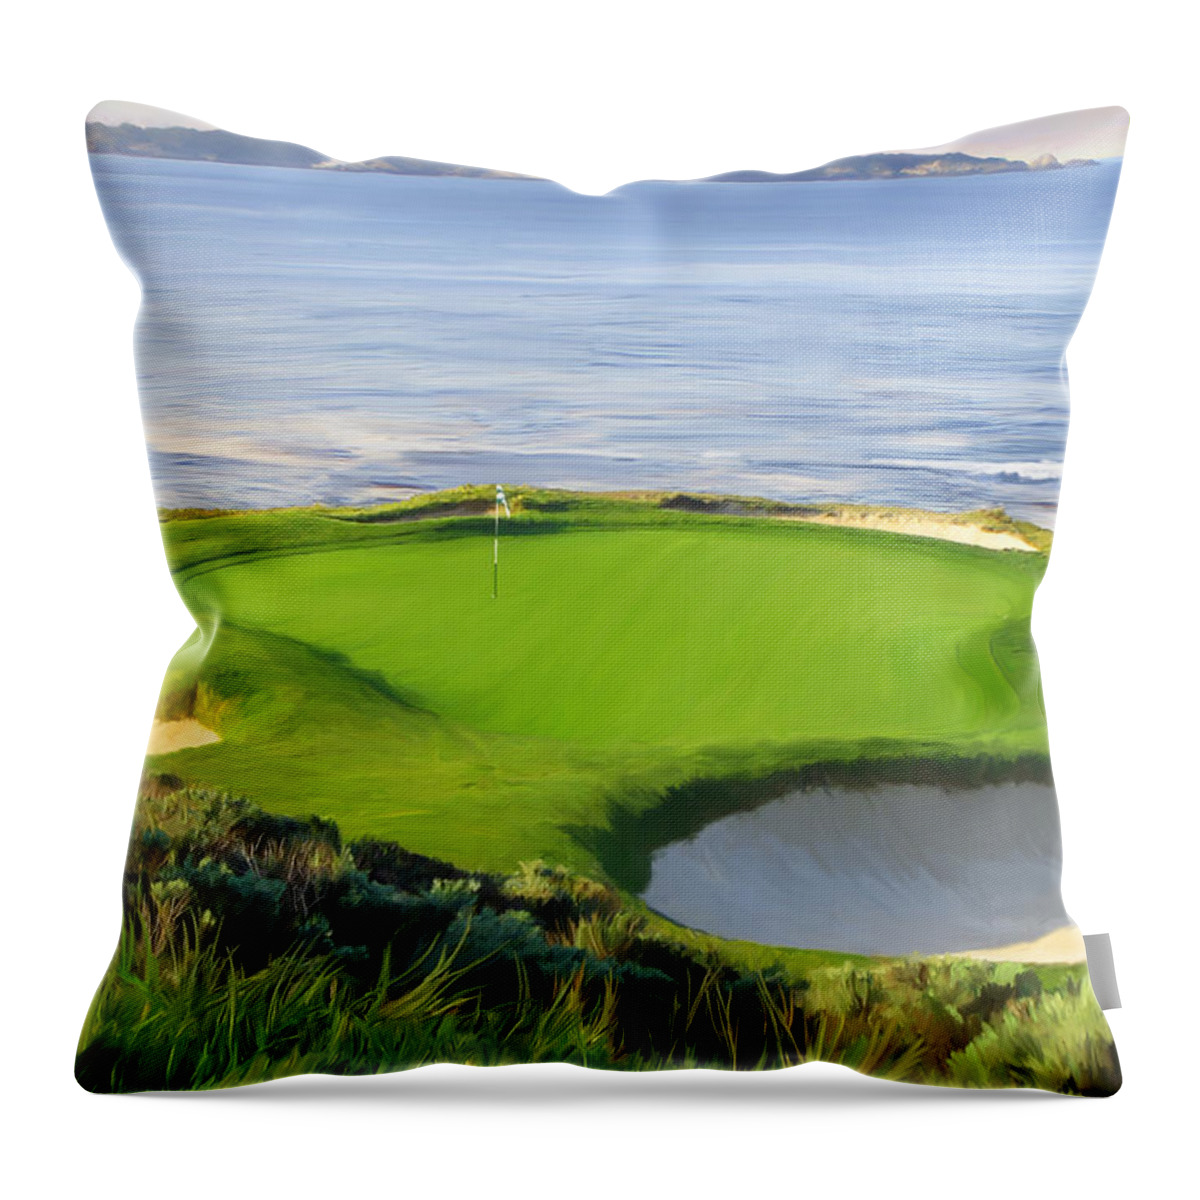 Th Hole Throw Pillow featuring the painting 7th Hole At Pebble Beach Ver by Tim Gilliland